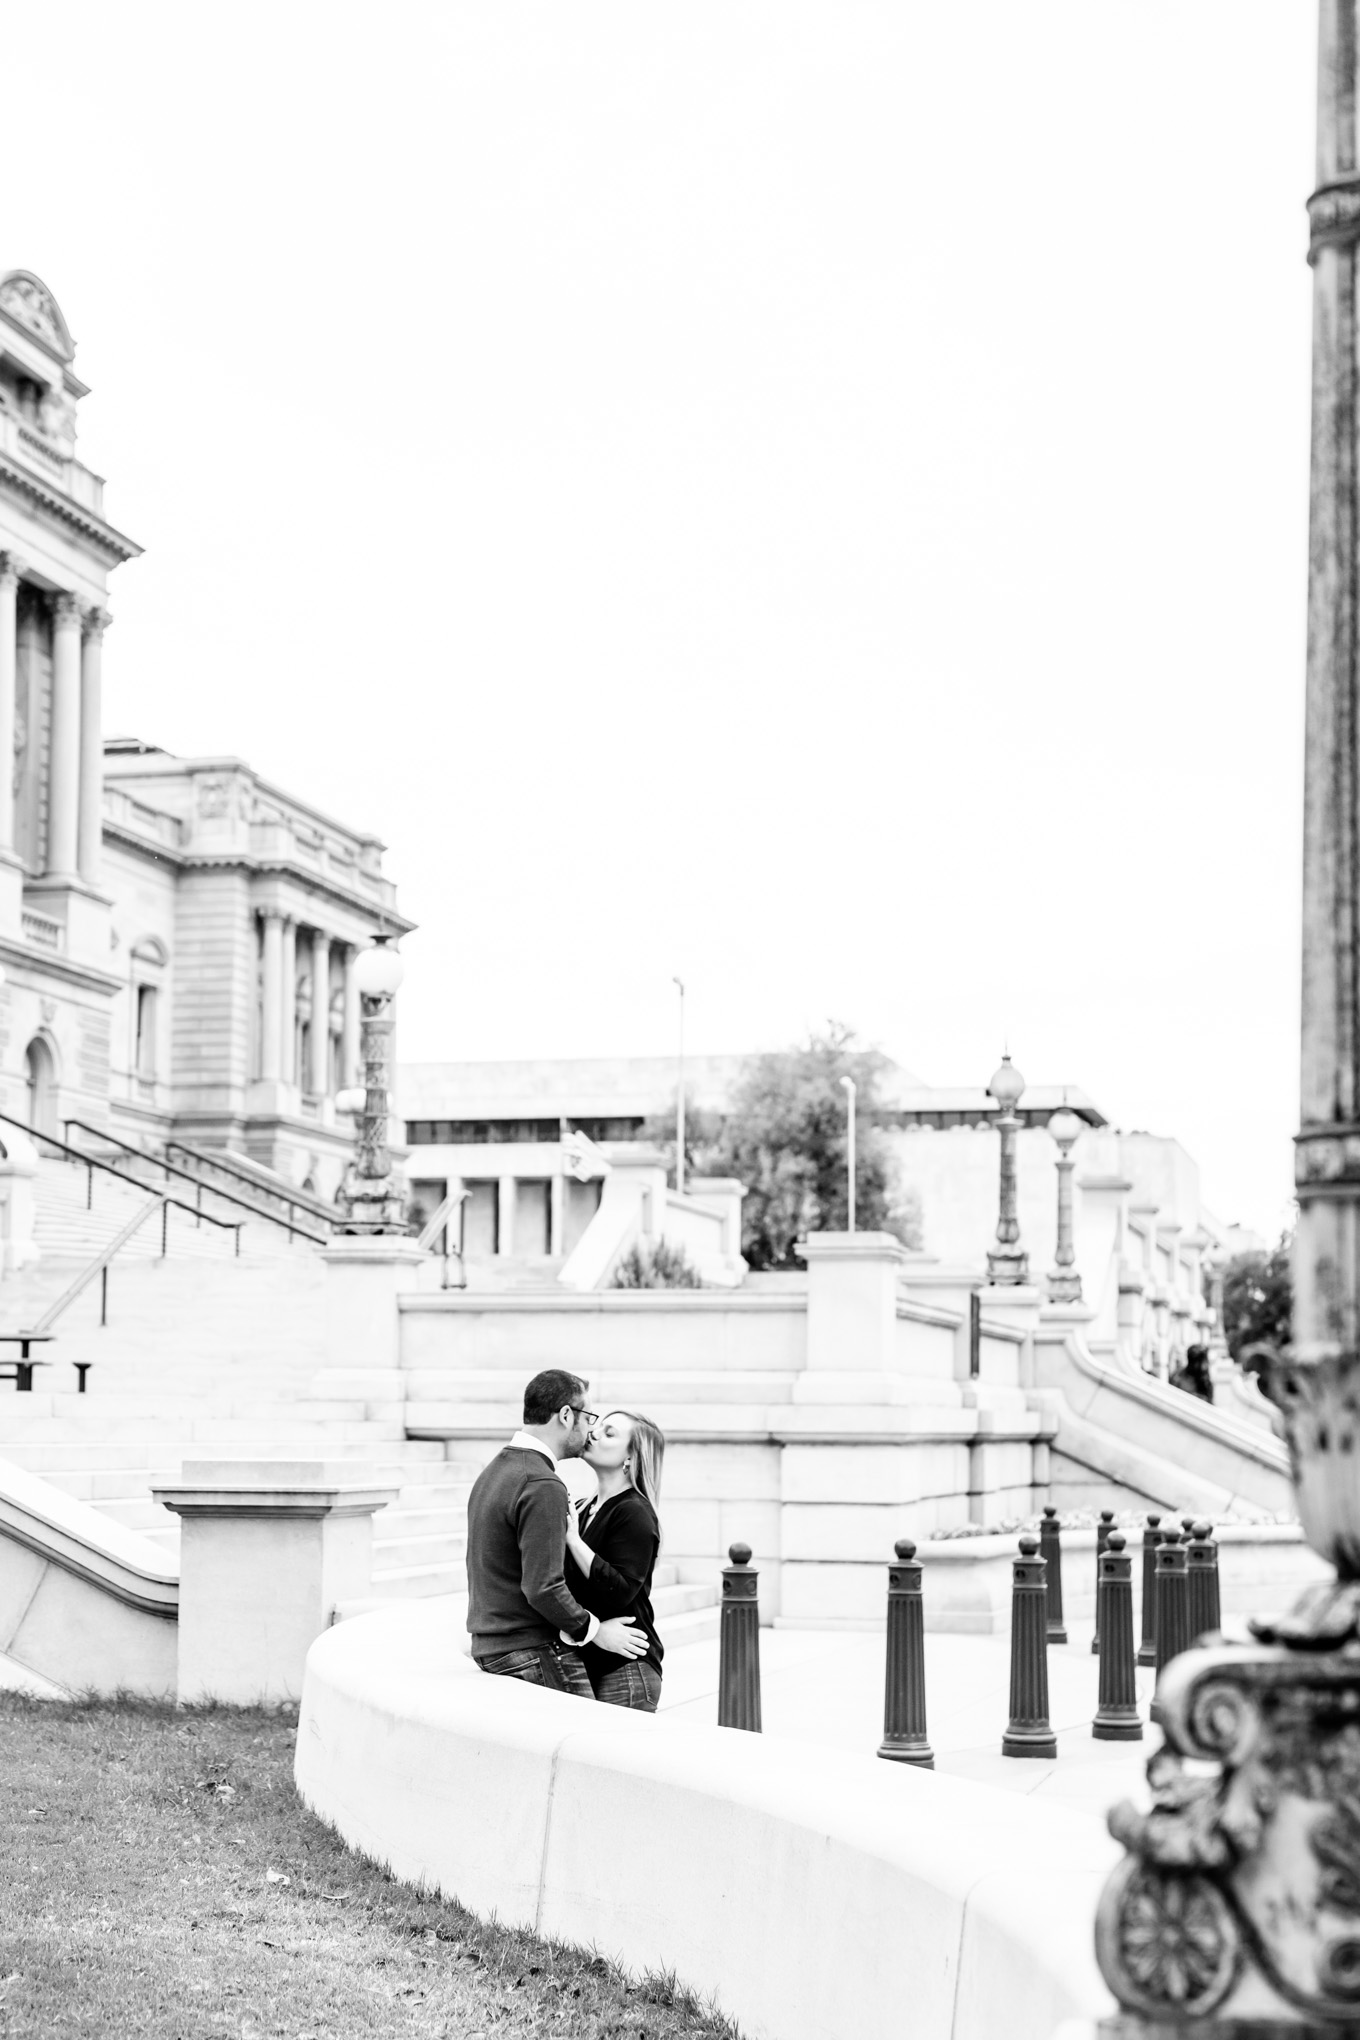 casual Capitol Hill engagement photos, engagement photos, Capitol Hill D.C., D.C. engagement photos, D.C. wedding photographer, D.C. engagement photographer, Rachel E.H. Photography, autumn engagement photos, casual engagement sessioon outfits, engagement session outfits, engaged couple, D.C. couple, black and white engagement photos